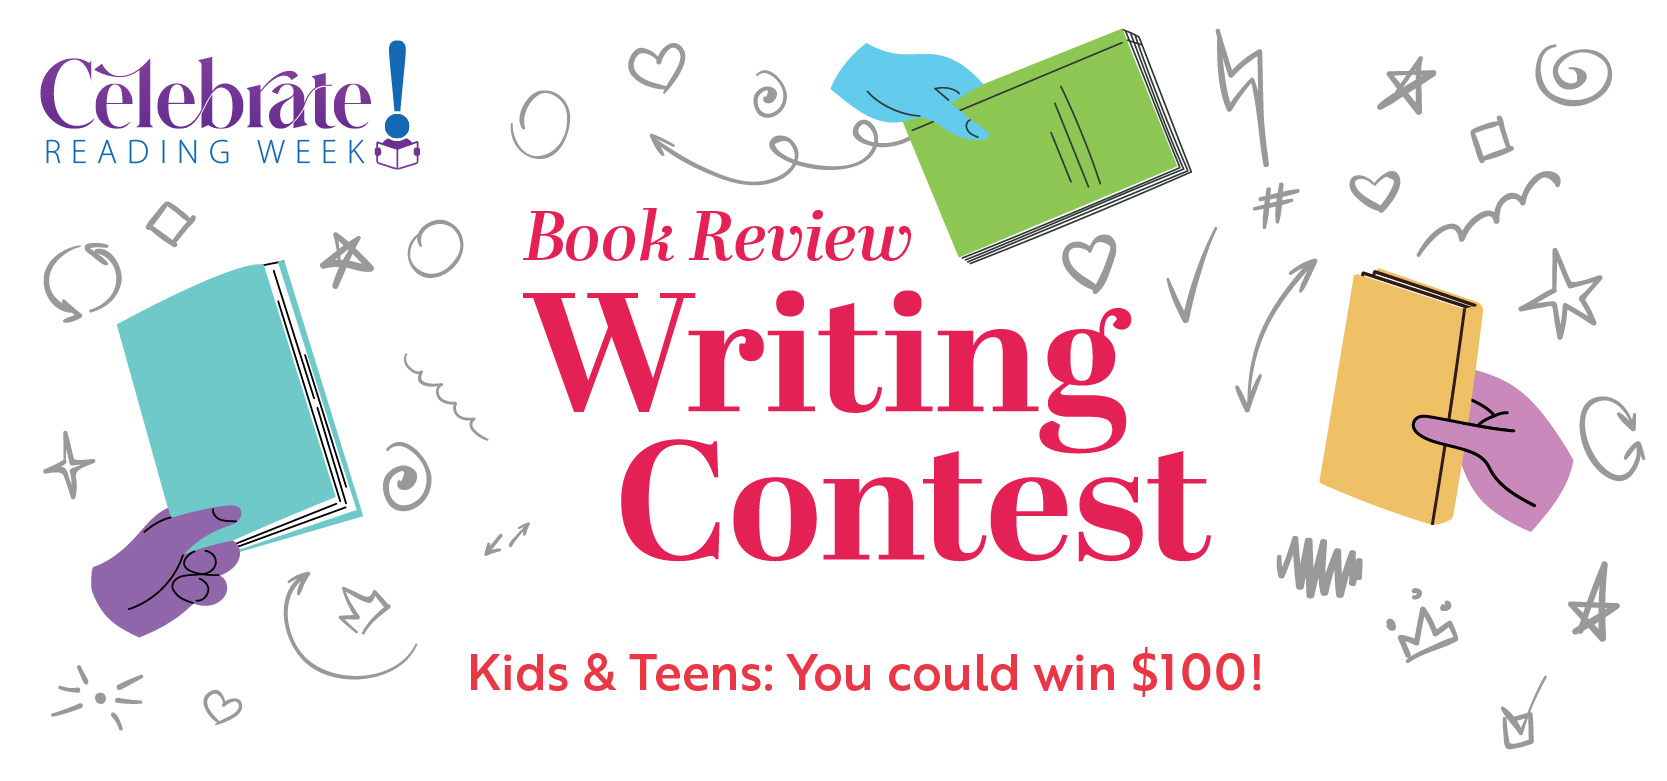 Book Review Writing Contest. Kids & Teens: You could win $100 in cash!